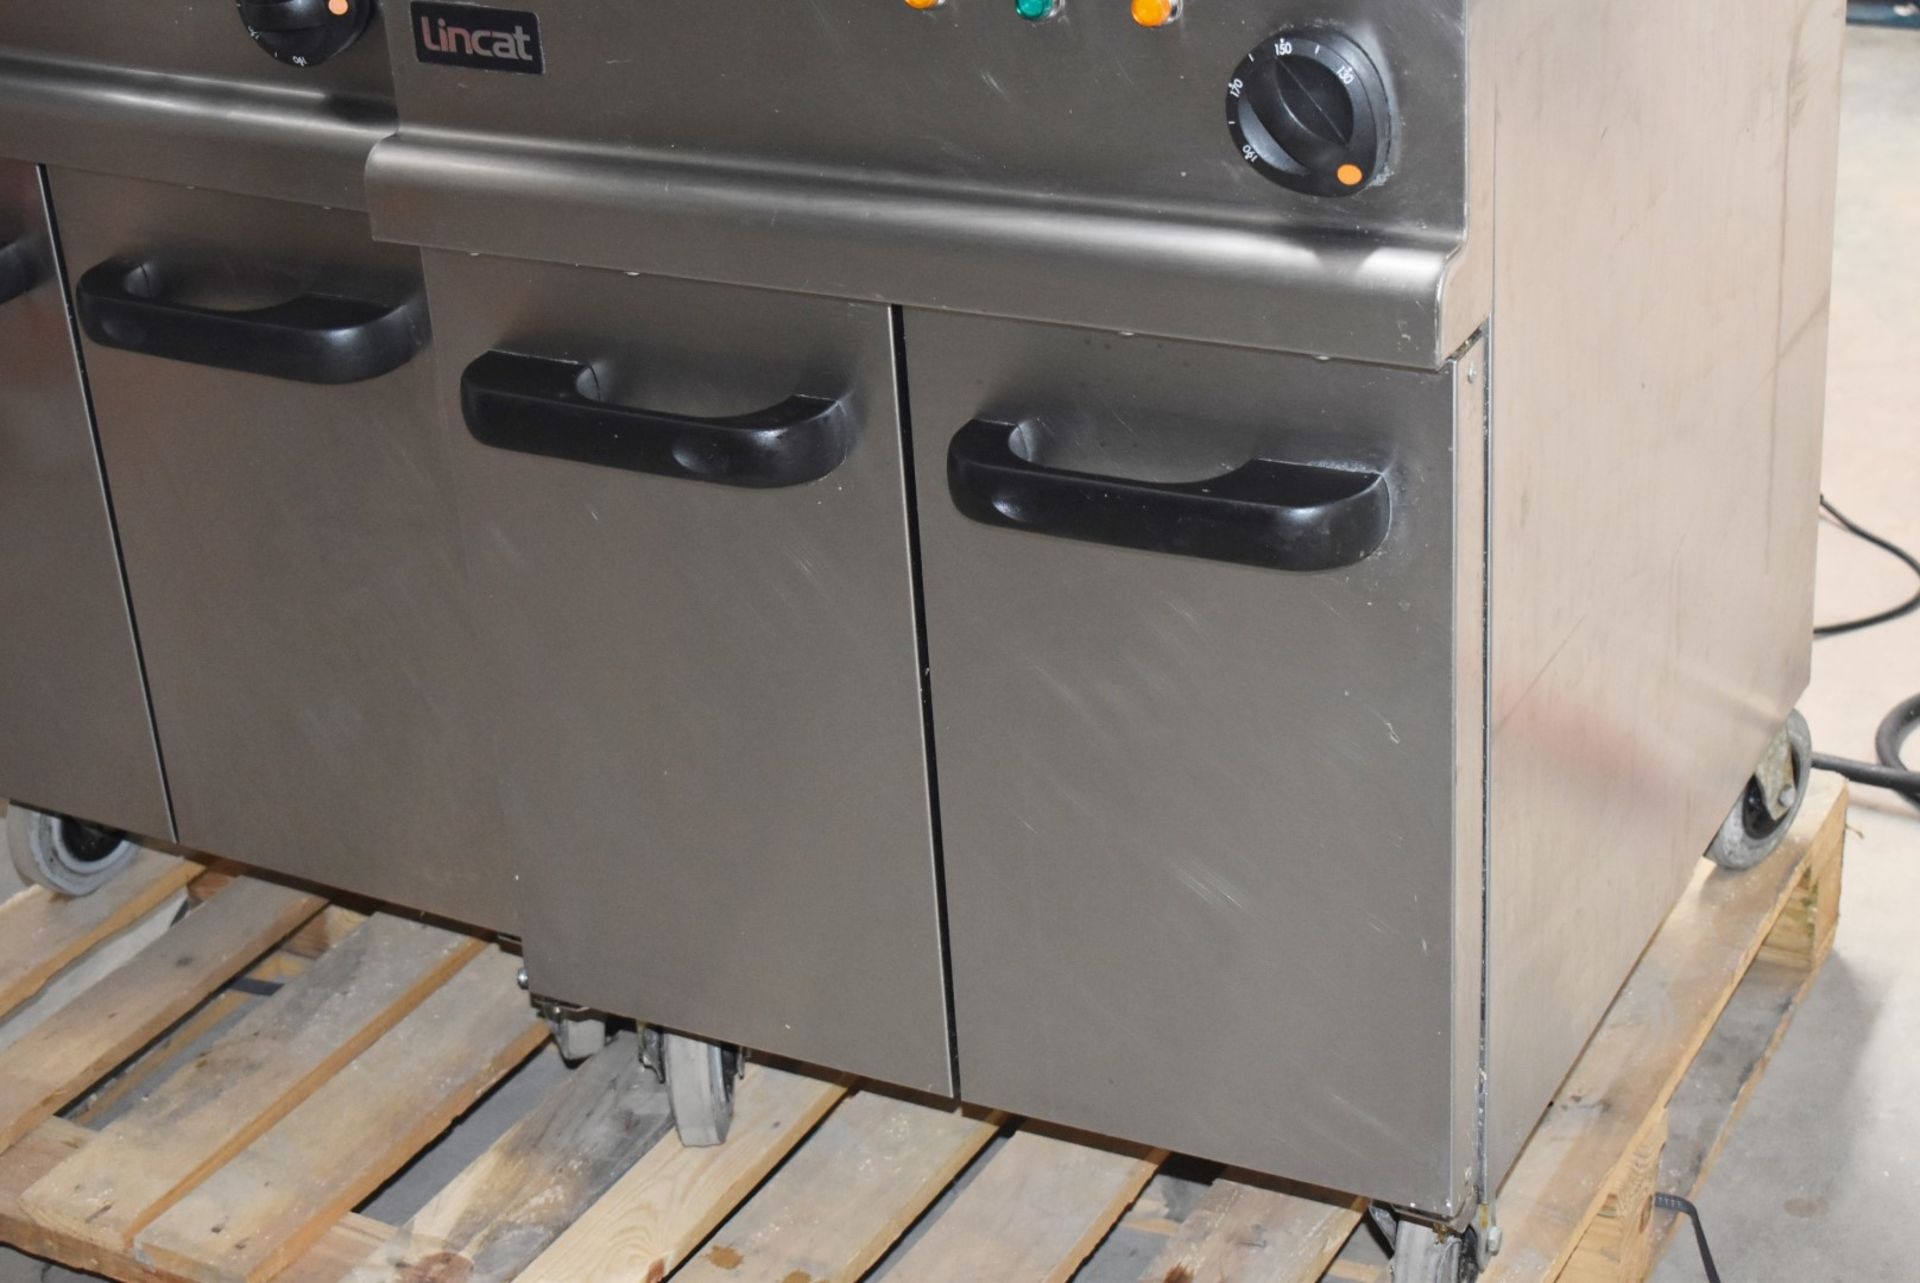 1 x Lincat Opus 700 OE7113 Single Large Tank Electric Fryer With Built In Filteration - 240V / 3PH P - Image 6 of 11